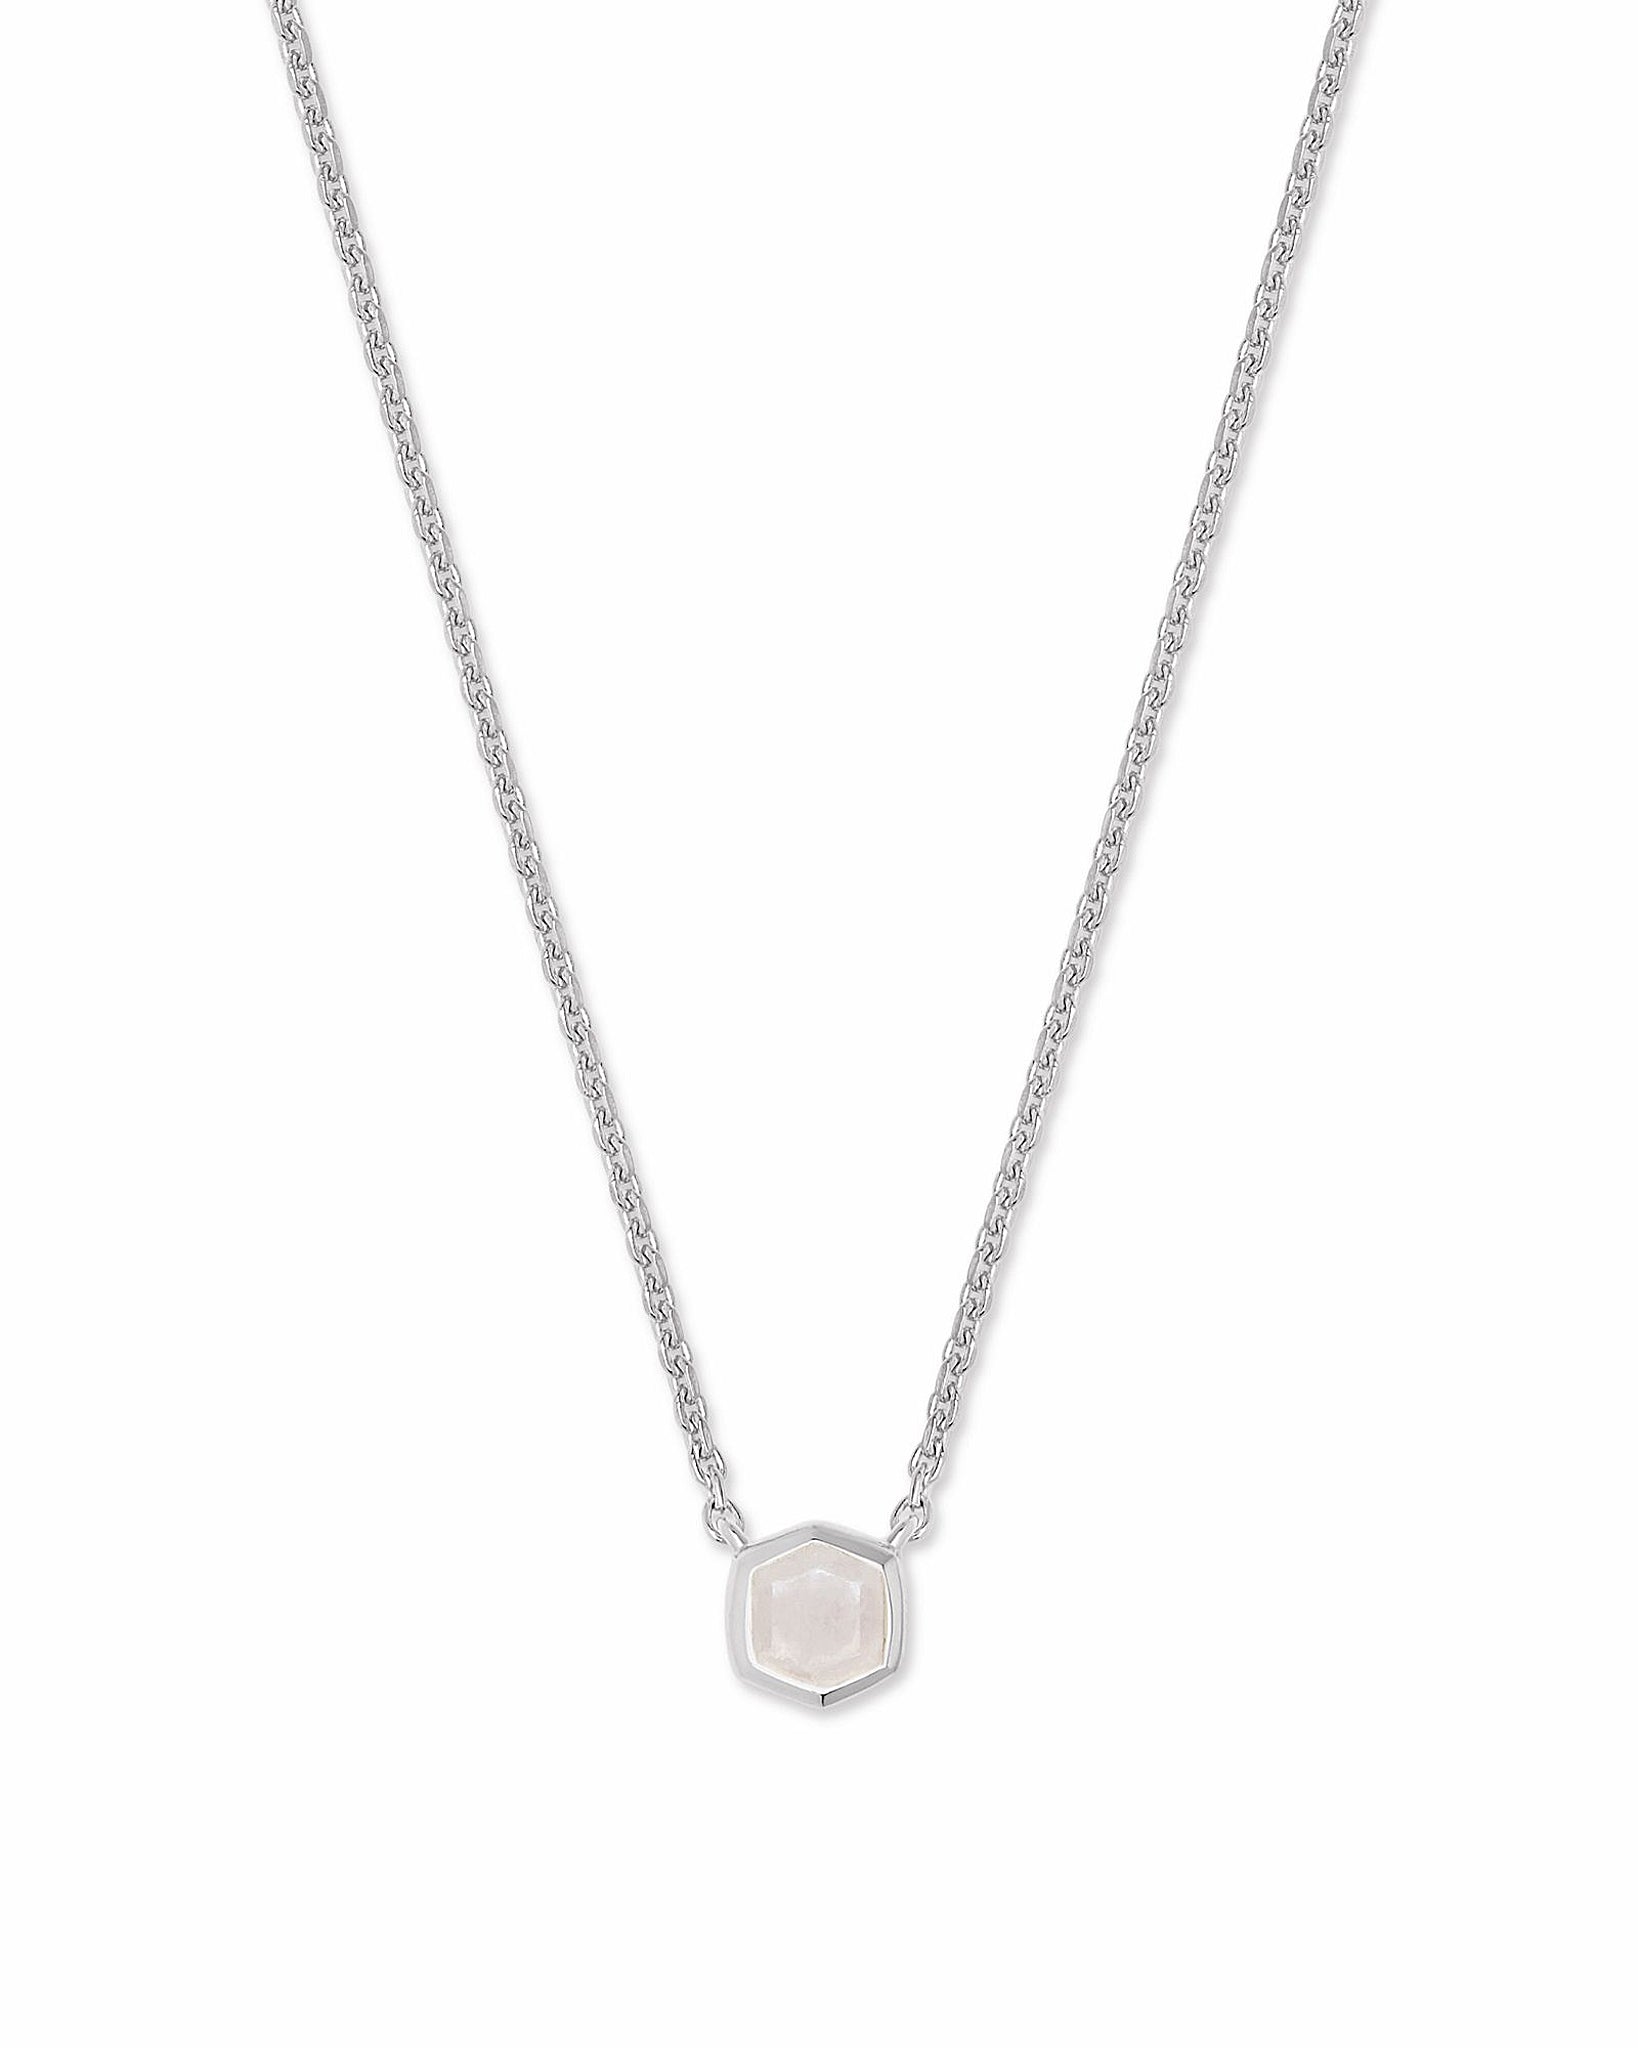 Kendra Scott Davie Pendant Necklace in Rainbow Moonstone and Sterling Silver